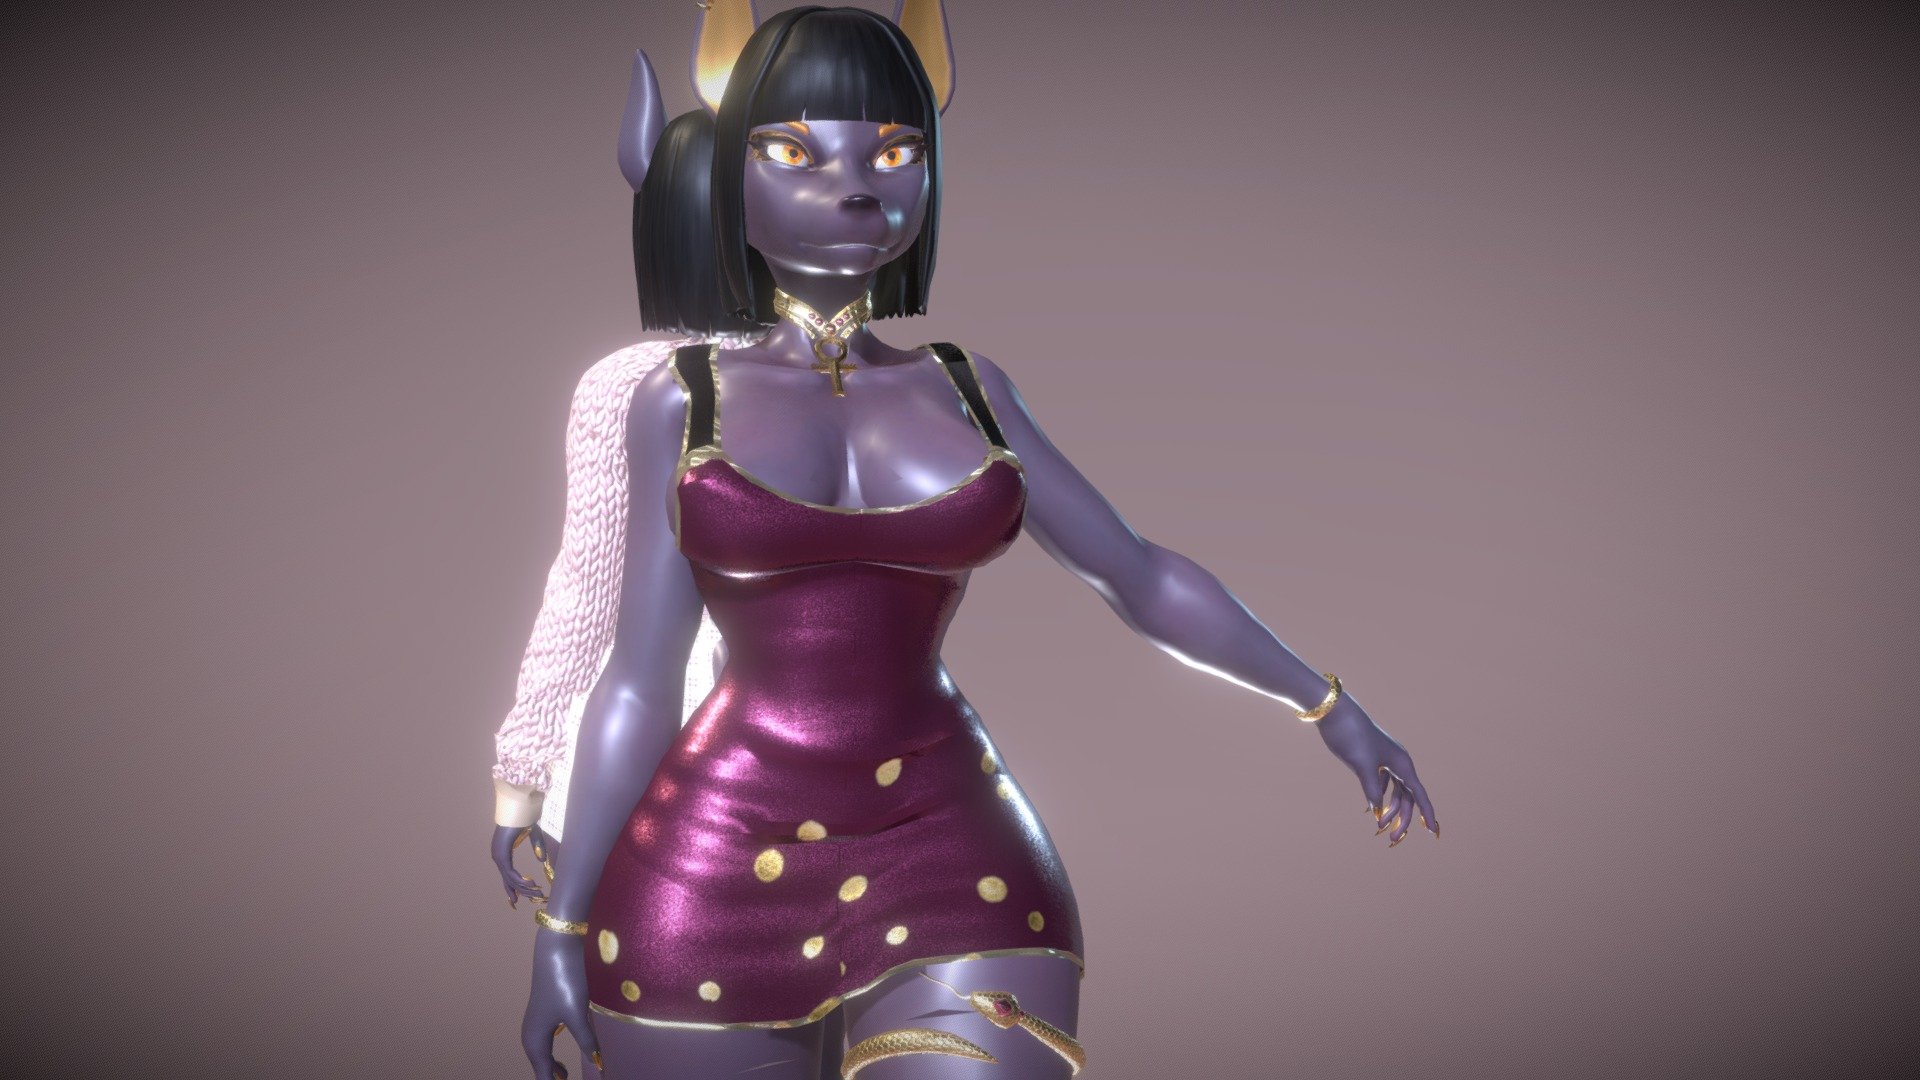 Anubis Avatar for VRChat, customizable ingame with 7 outfits to choose from!
You can find it on my gumroad page: https://linktr.ee/yawuu - VRChat Furry Model ~ Outfit Set 2 - 3D model by Yawuu 3d model